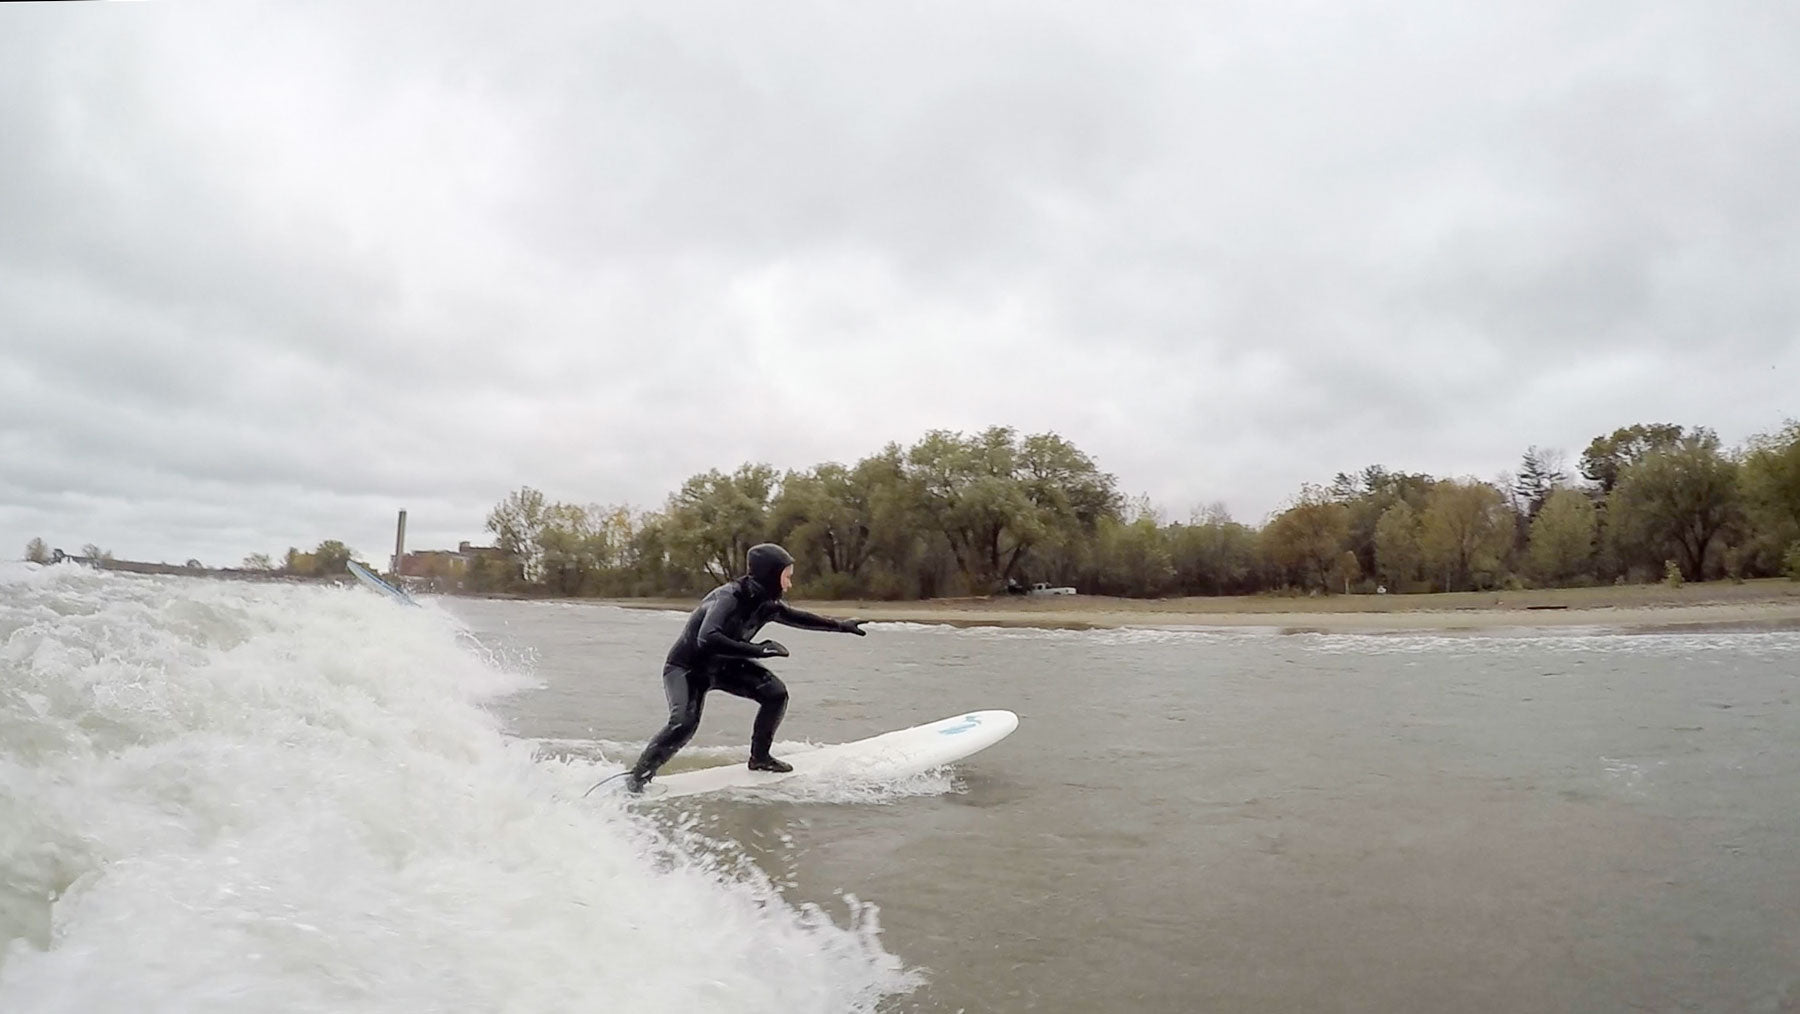 Surfing on Lake Ontario Surf the Greats Great Lakes by Antonio Lennert